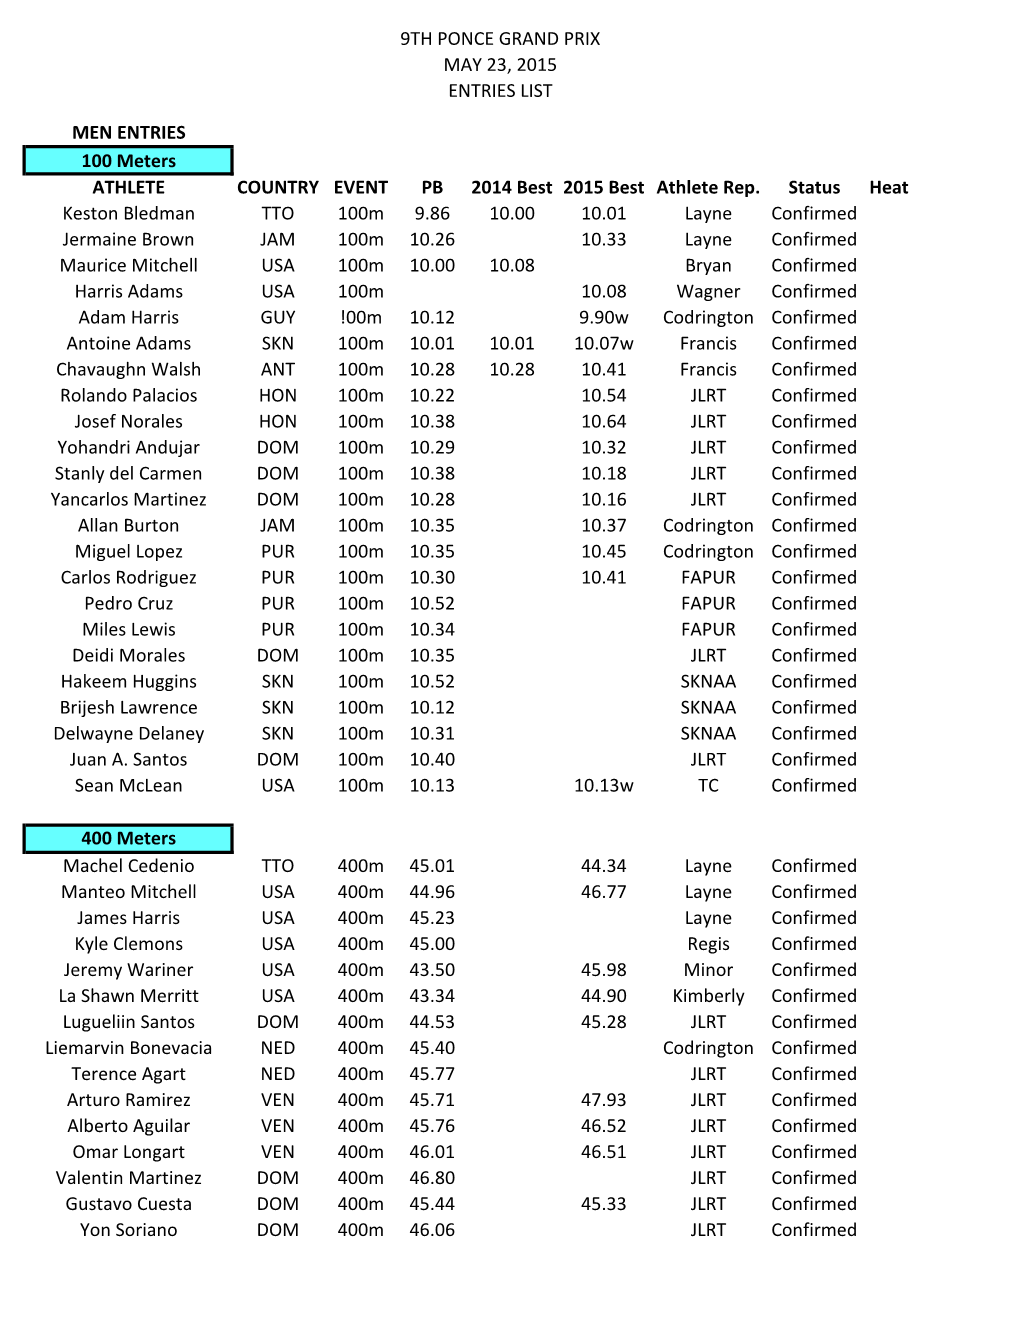 9Th Ponce Grand Prix May 23, 2015 Entries List Men